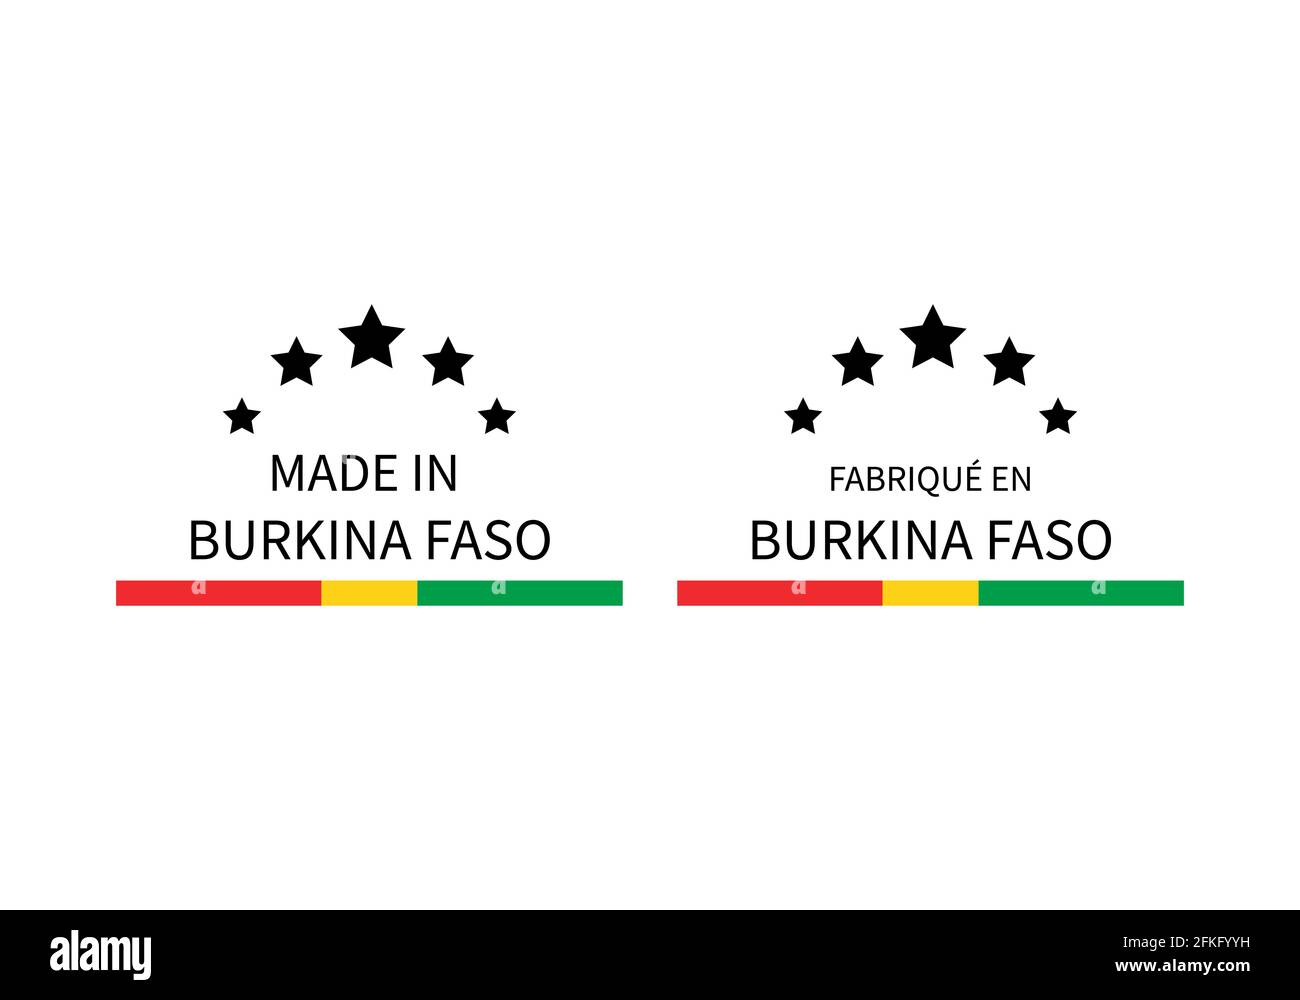 https://c8.alamy.com/comp/2FKFYYH/made-in-burkina-faso-labels-in-english-and-in-french-languages-quality-mark-vector-icon-perfect-for-logo-design-tags-badges-emblem-stickers-pro-2FKFYYH.jpg